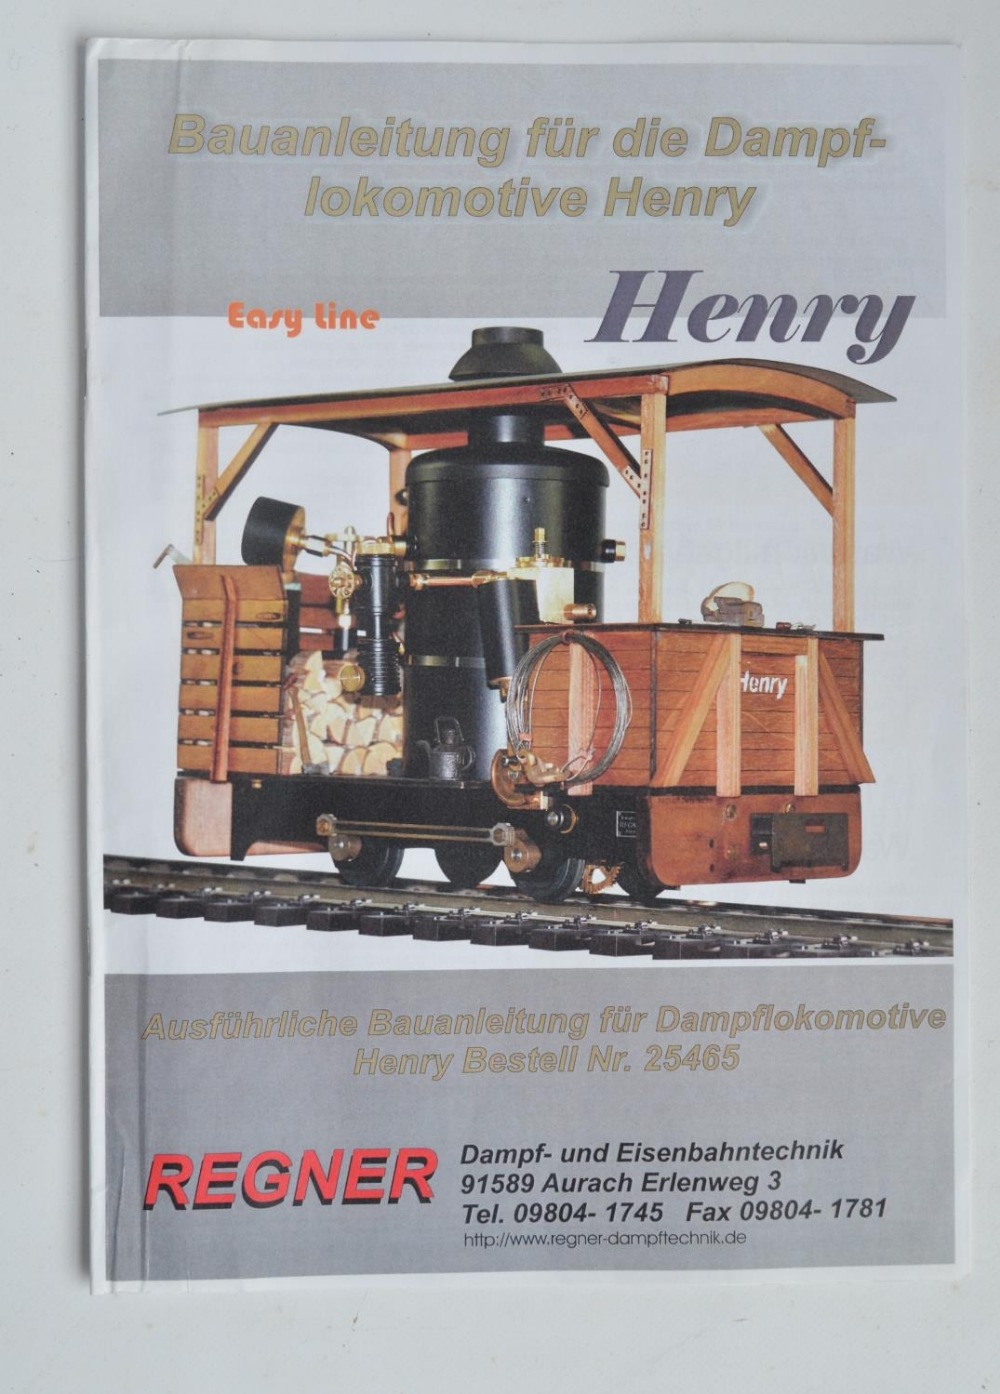 32mm G gauge outdoor metal narrow 0-4-0 steam engine 'Henry' from Regner, with German language - Image 6 of 6